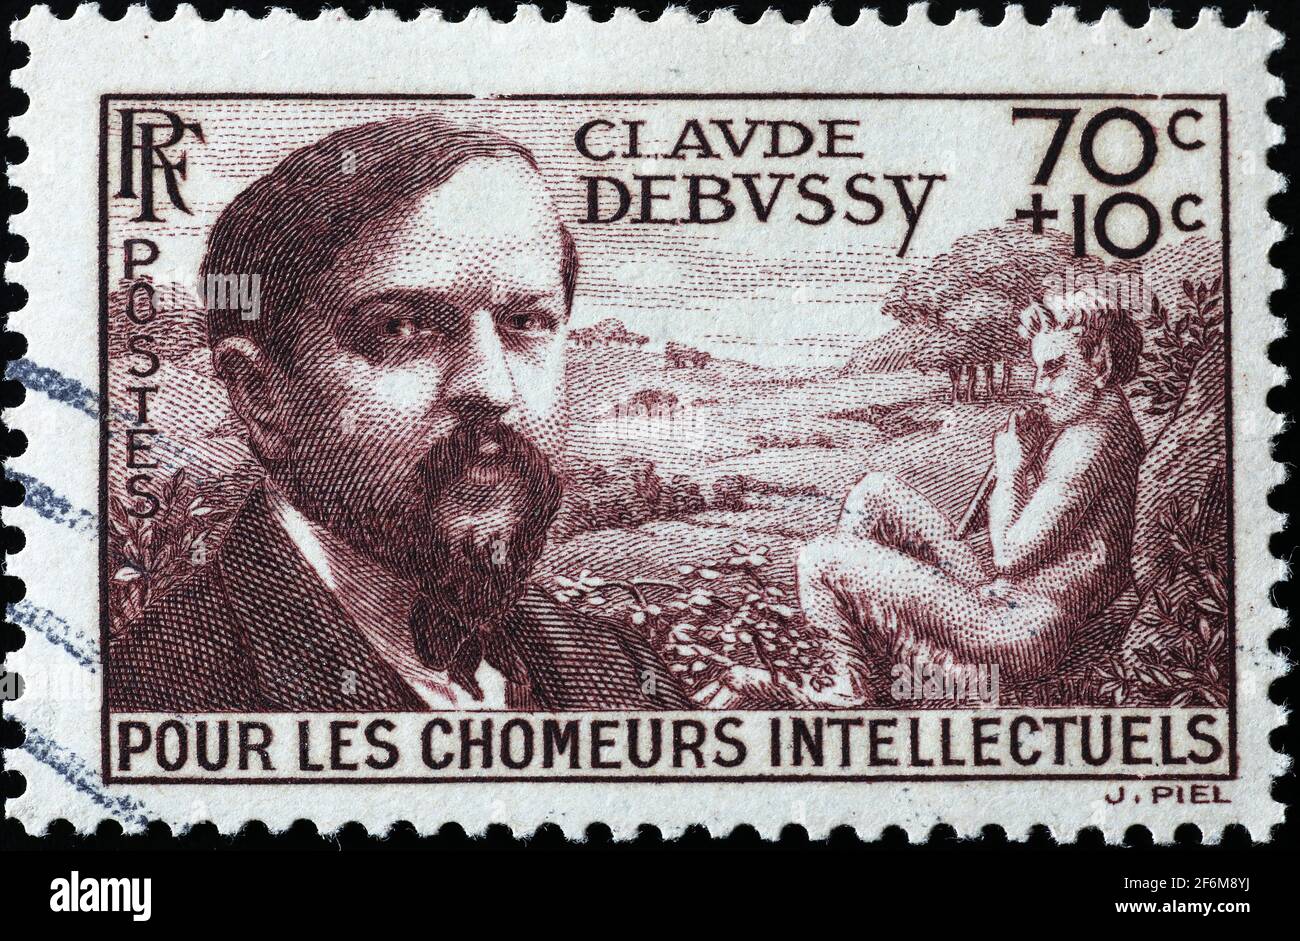 Claude Debussy on french postage stamp Stock Photo